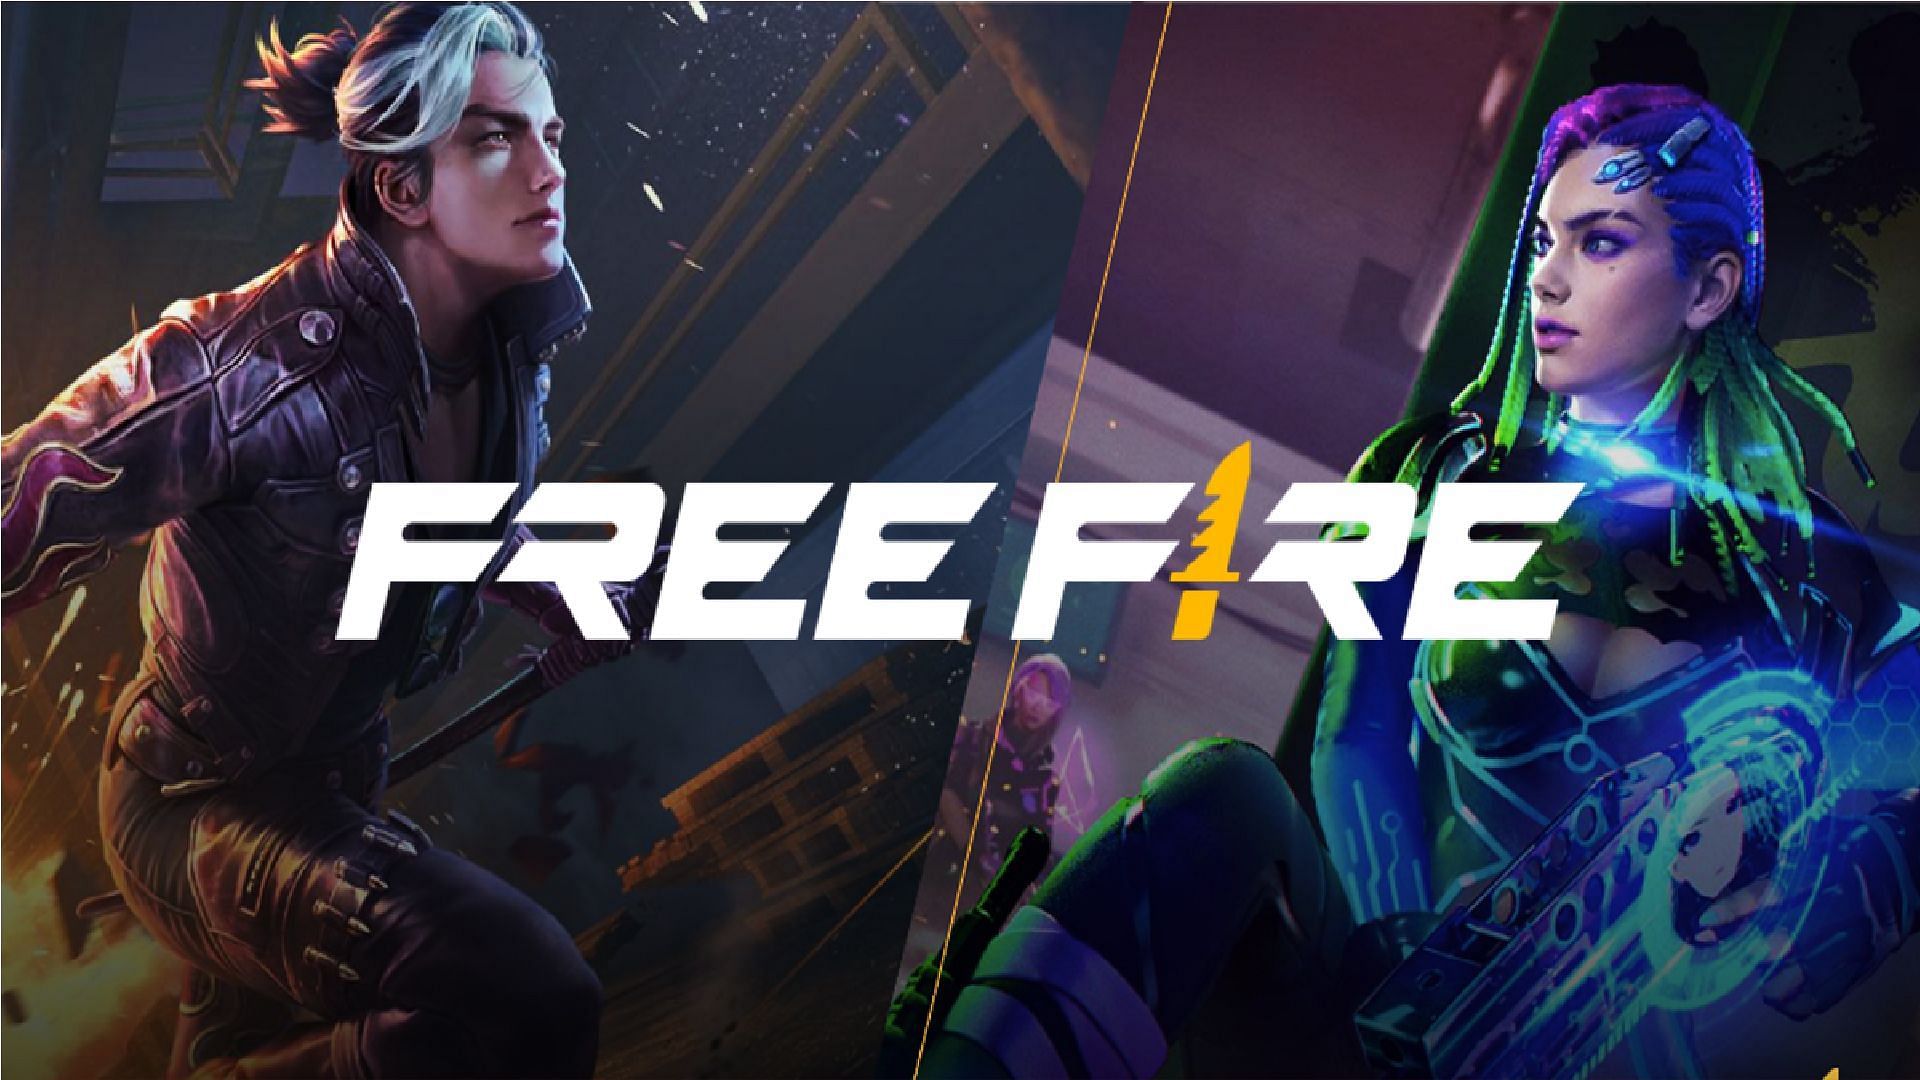 ARRIVING TOGETHER - Indian gamers league- freefire posts.